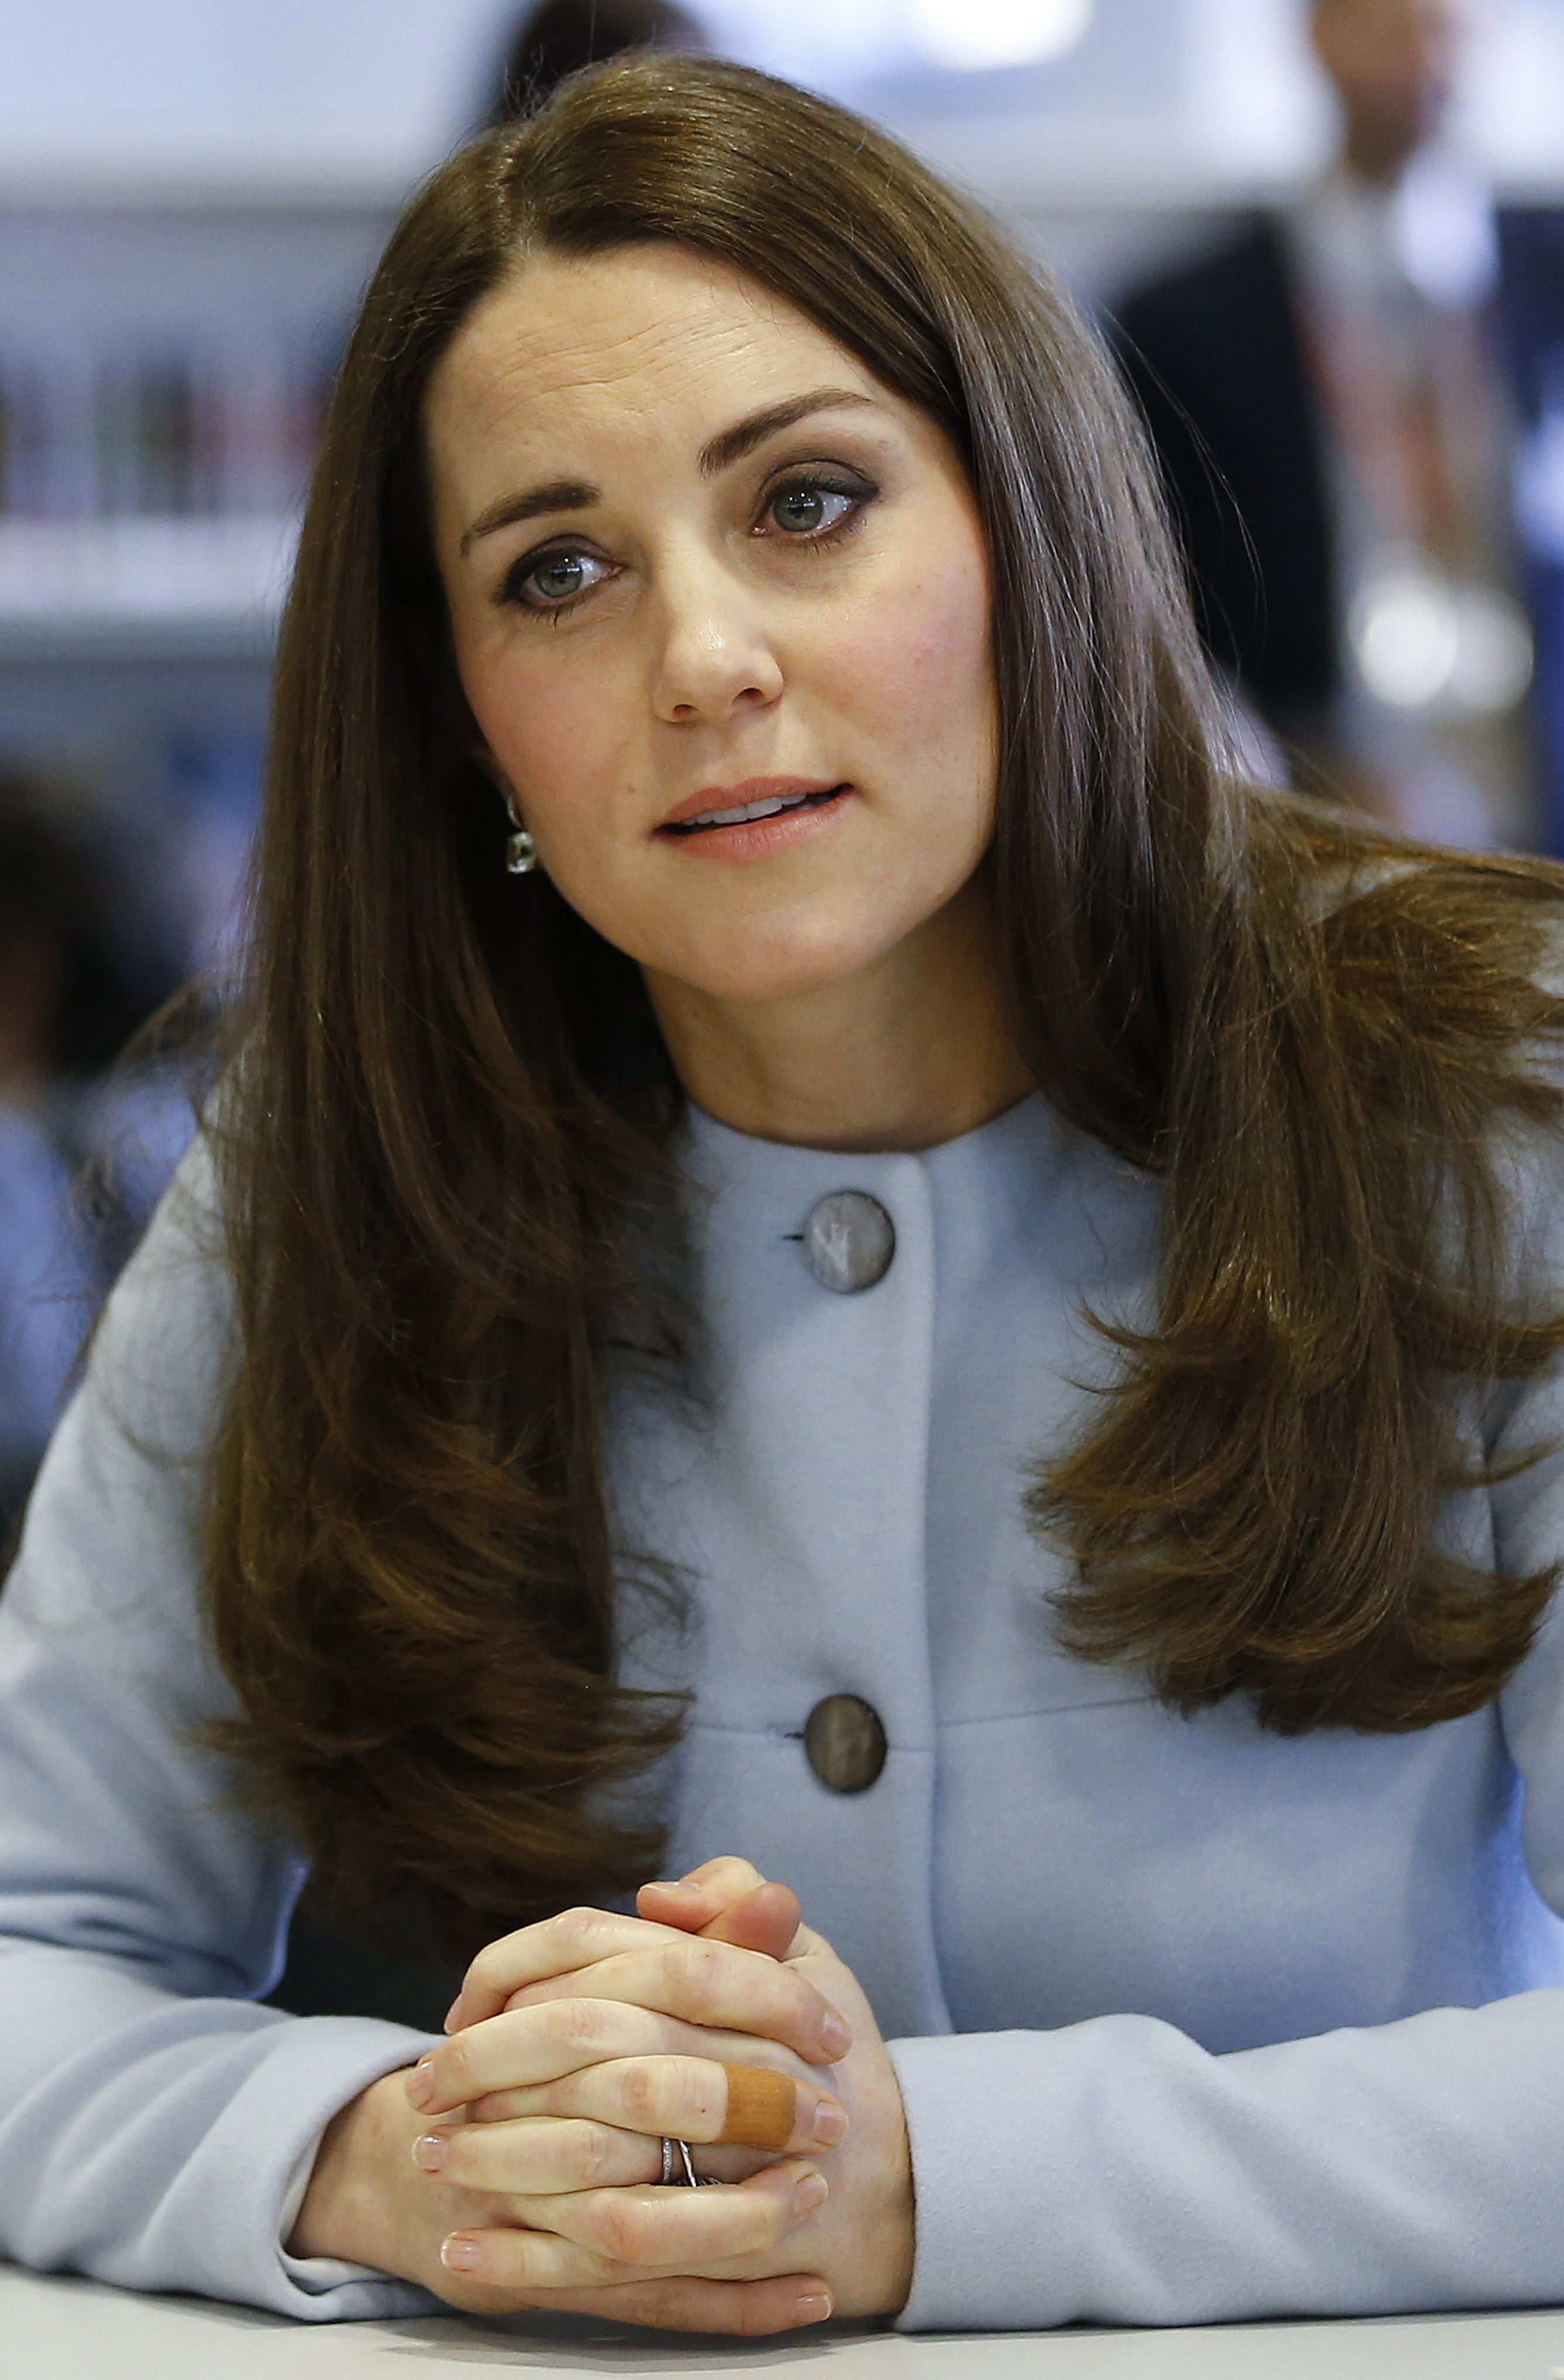 Princess Catherine during her visit to Kensington Aldridge Academy in London, England on January 19, 2015 | Source: Getty Images